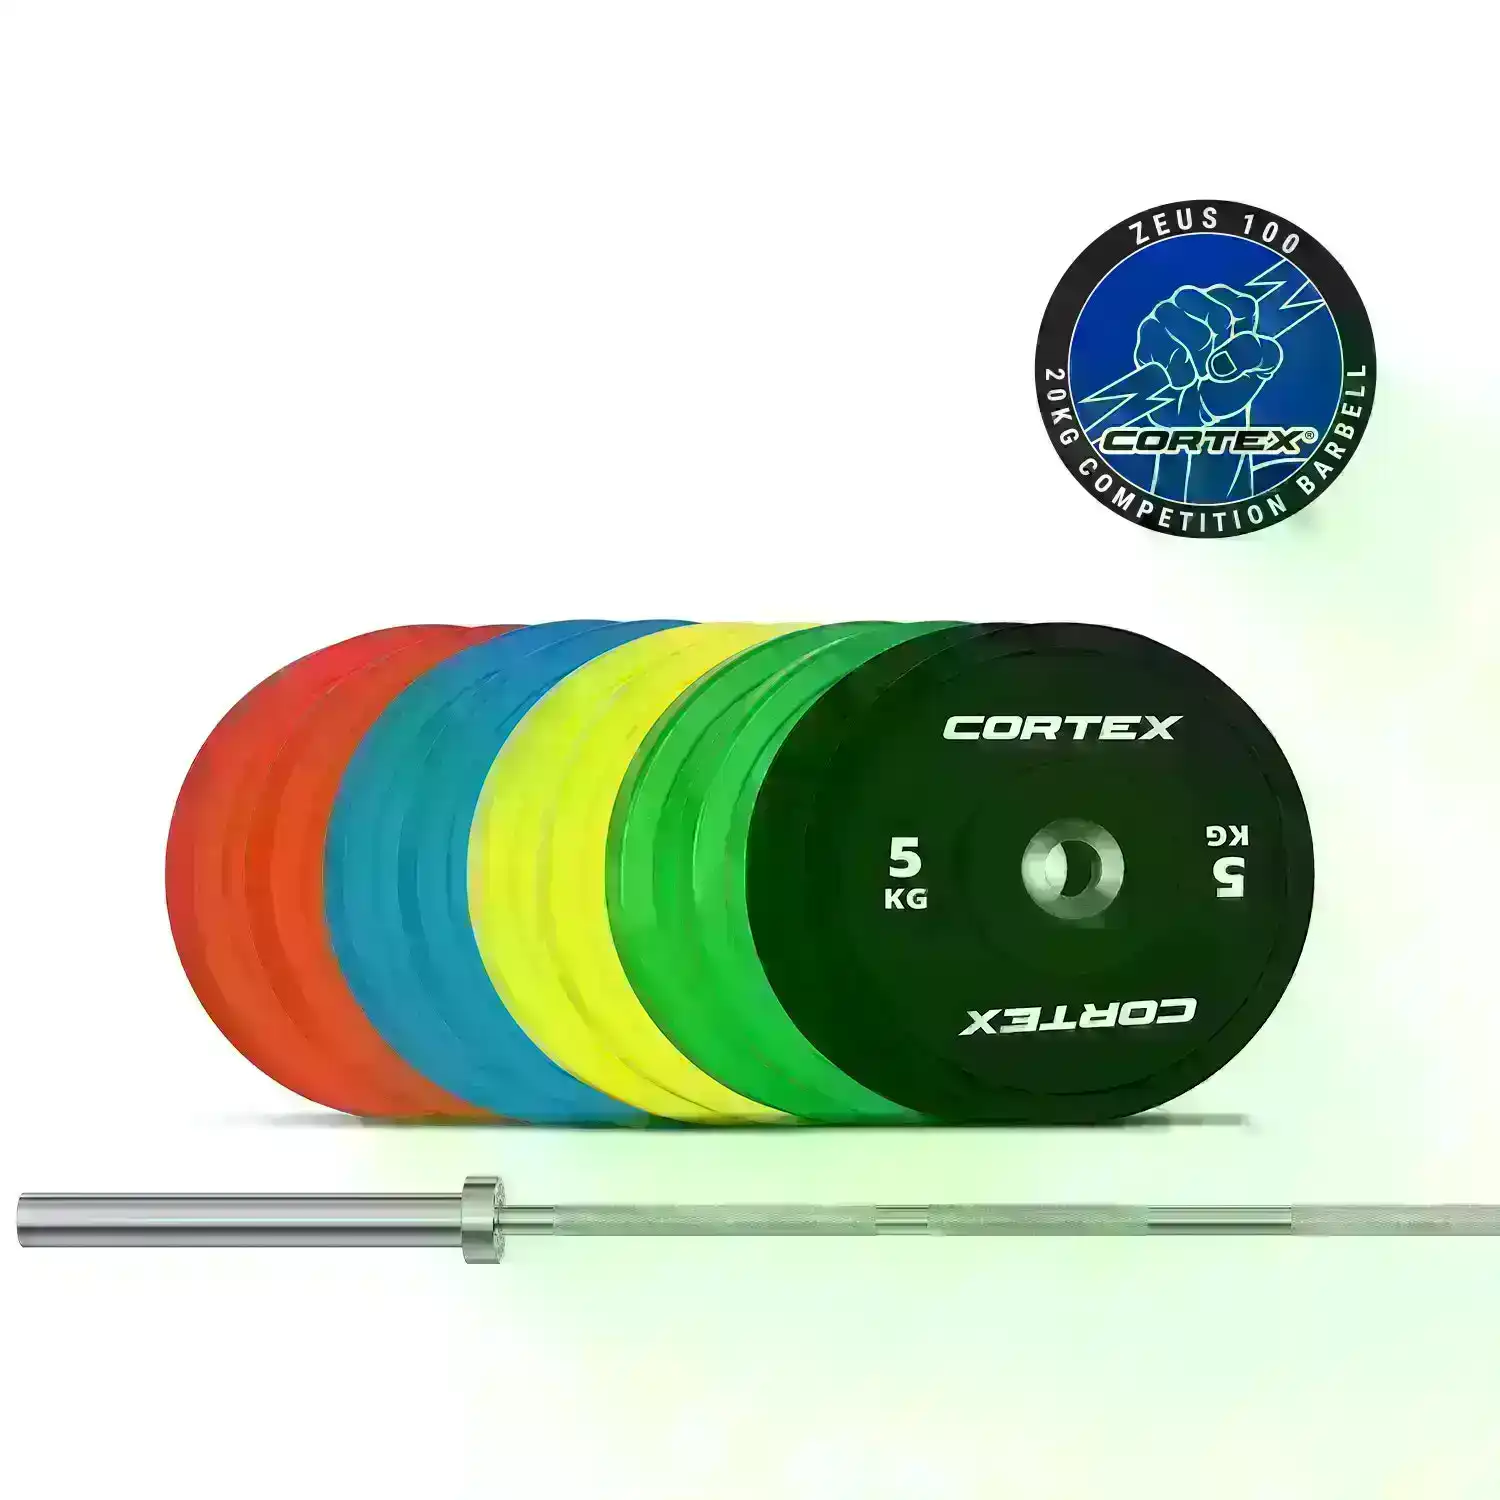 Cortex 170kg Competition Bumper Plates Set with Competition Barbell